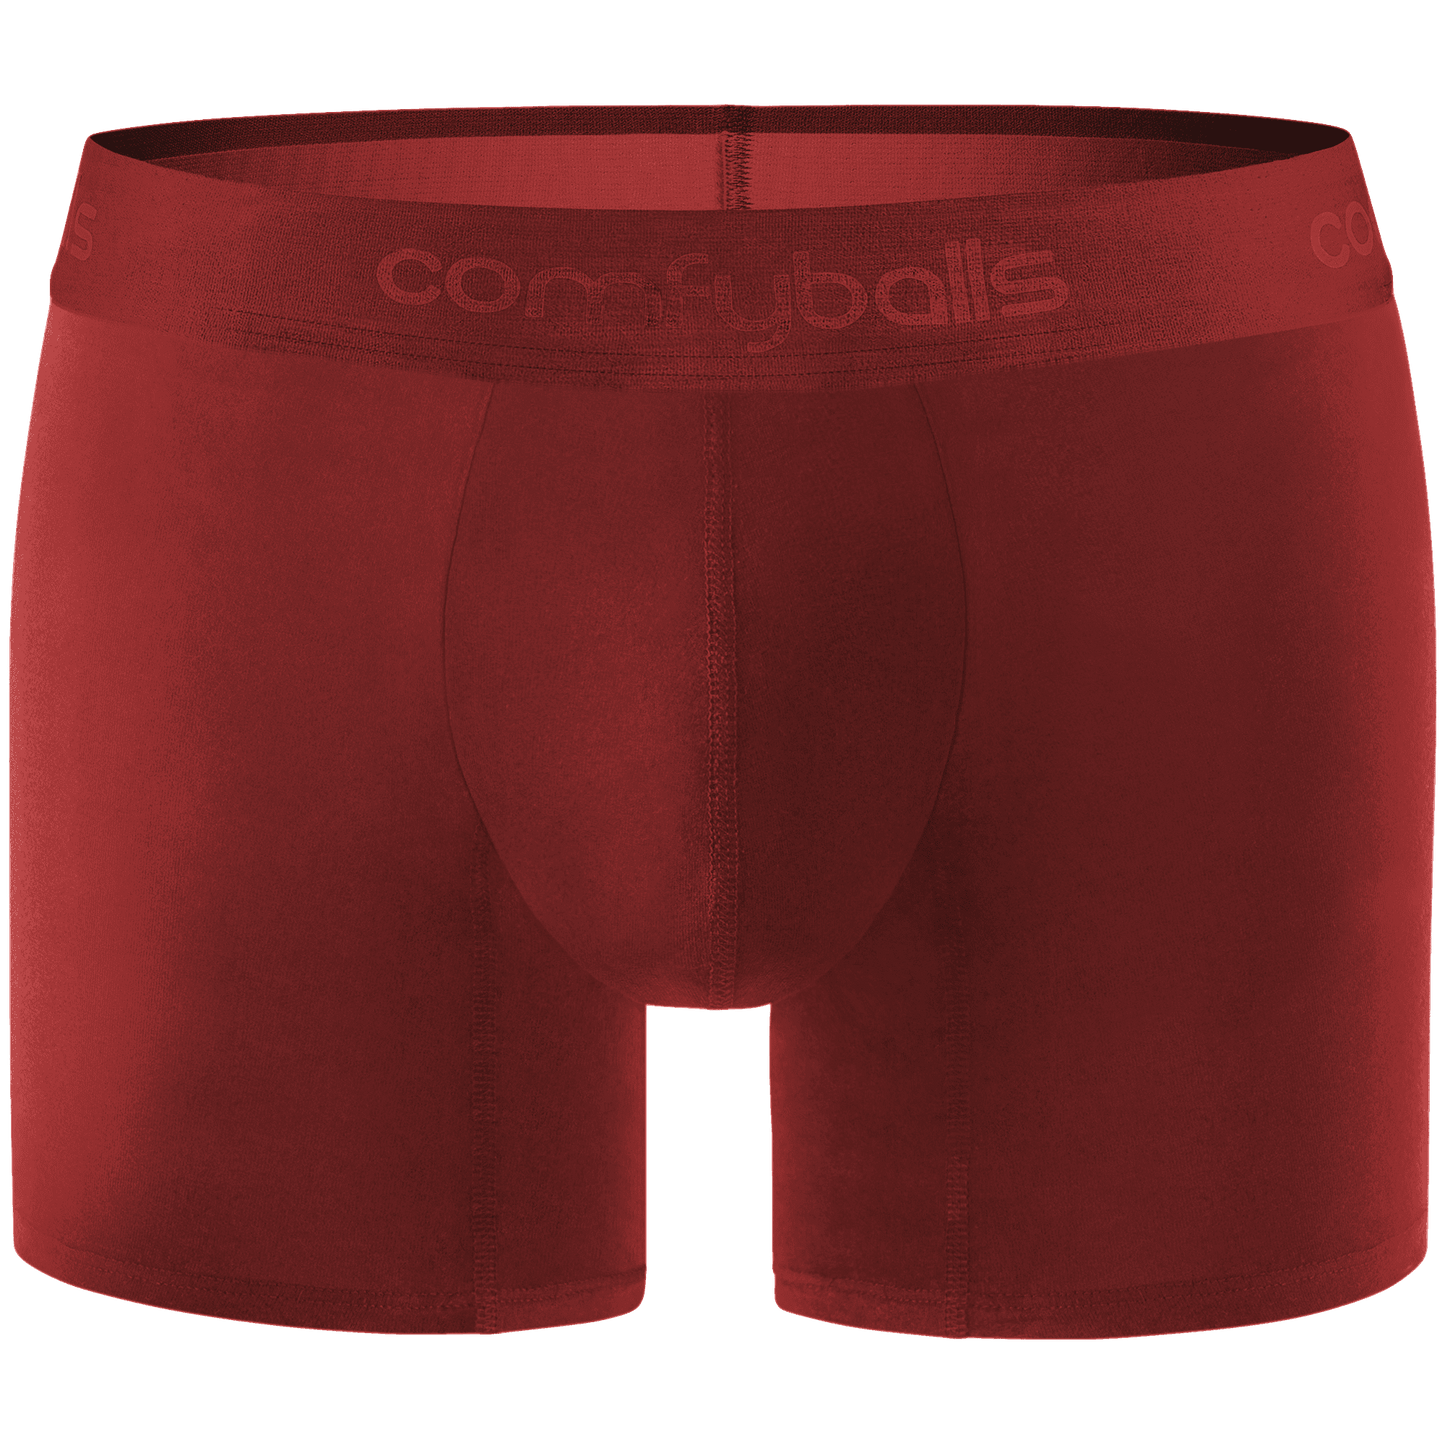 Long PERFORMANCE Ghost Crimson Rust Comfyballs boxers front